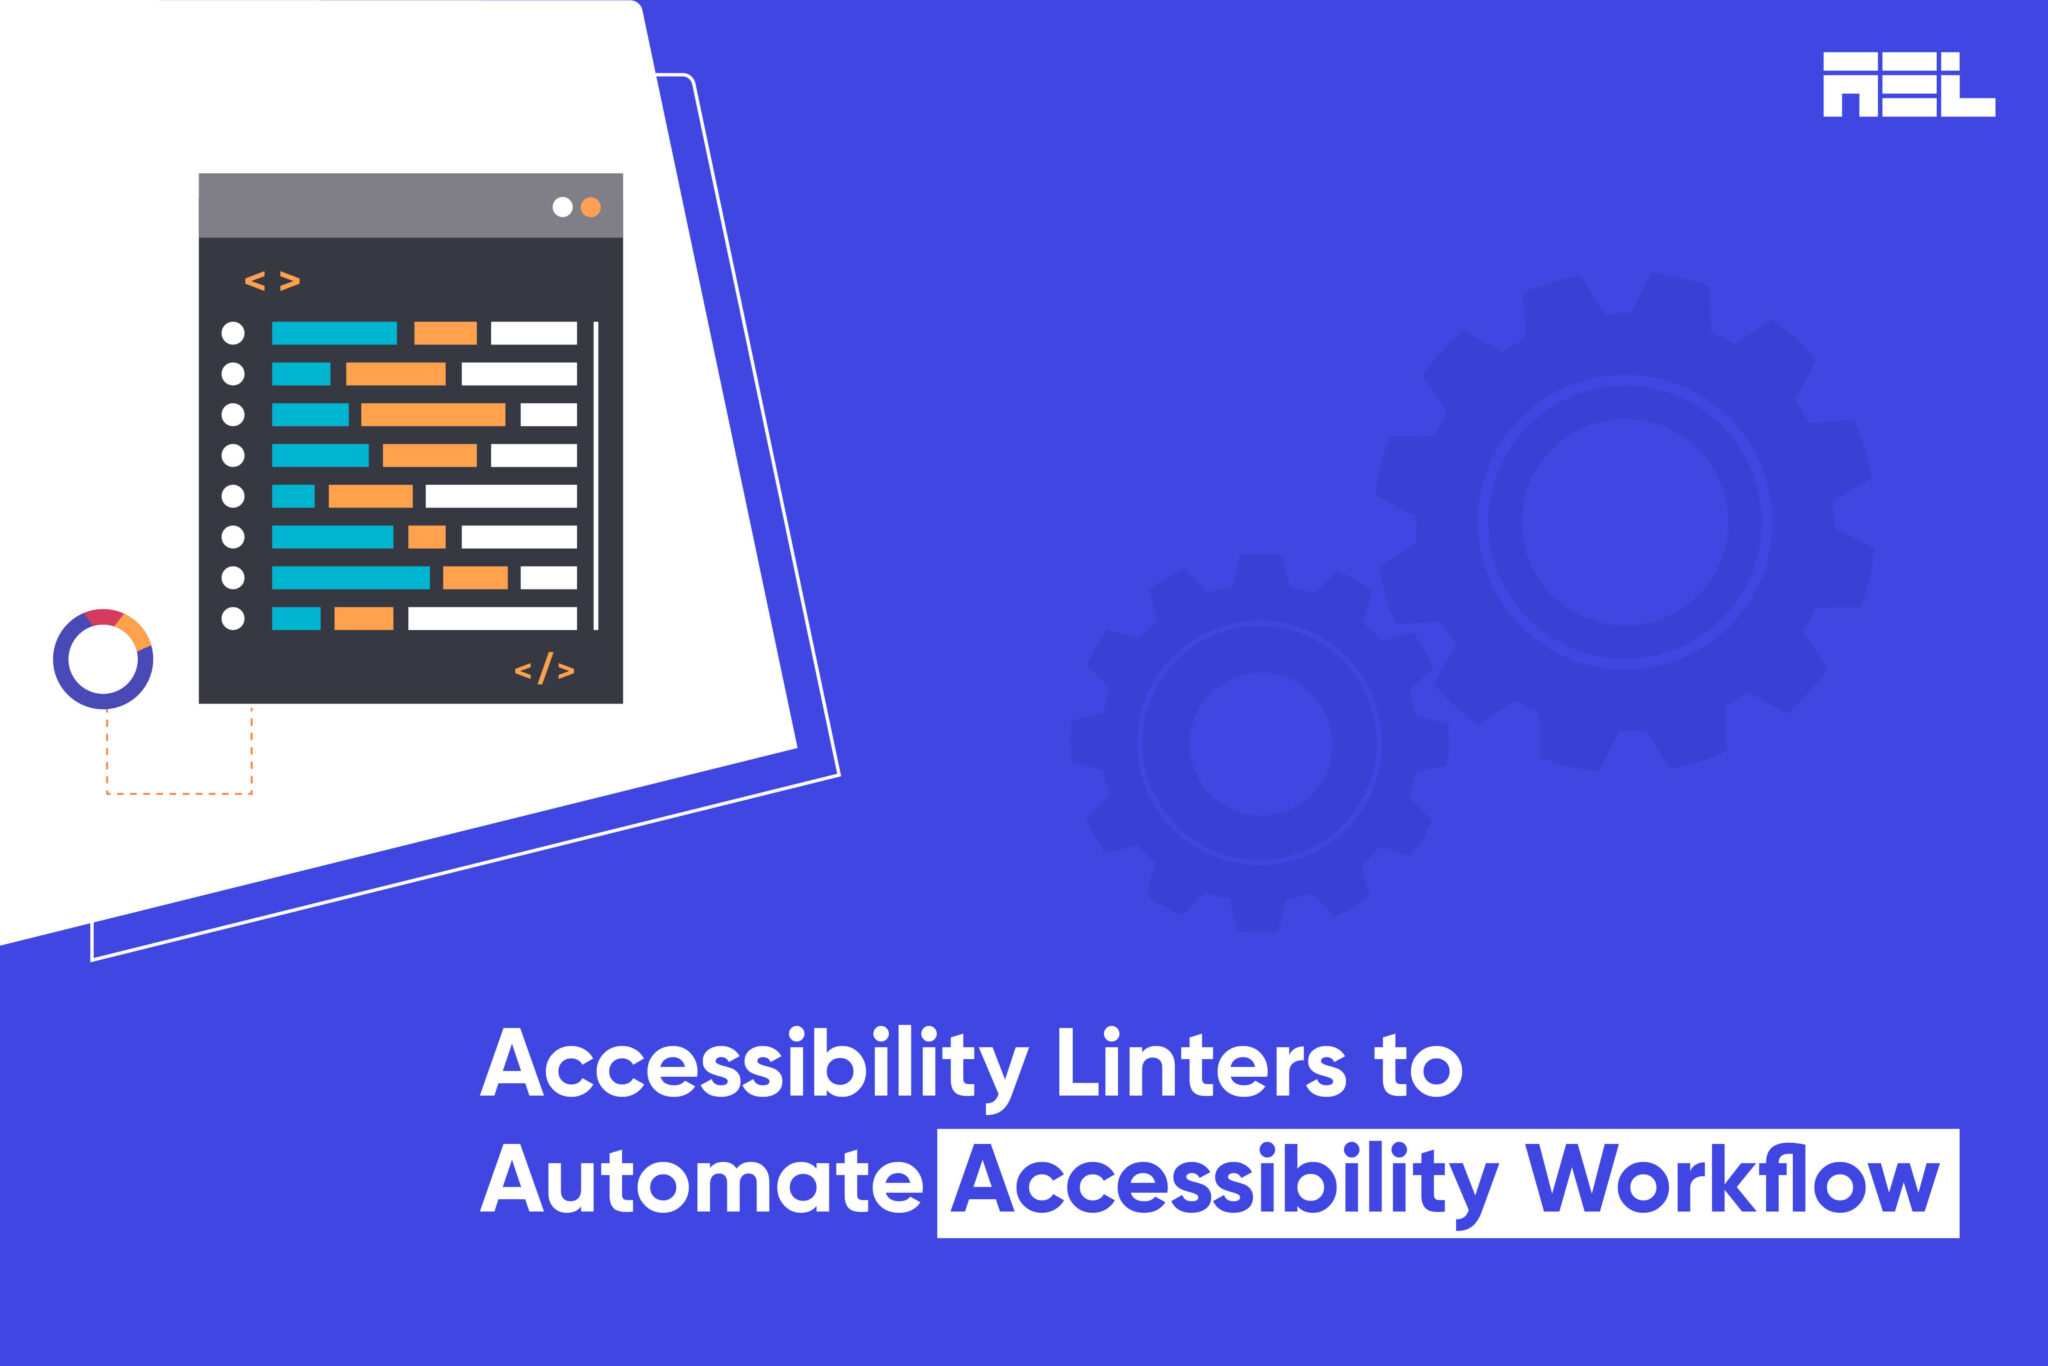 Accessibility Linters to Automate Accessibility Workflow